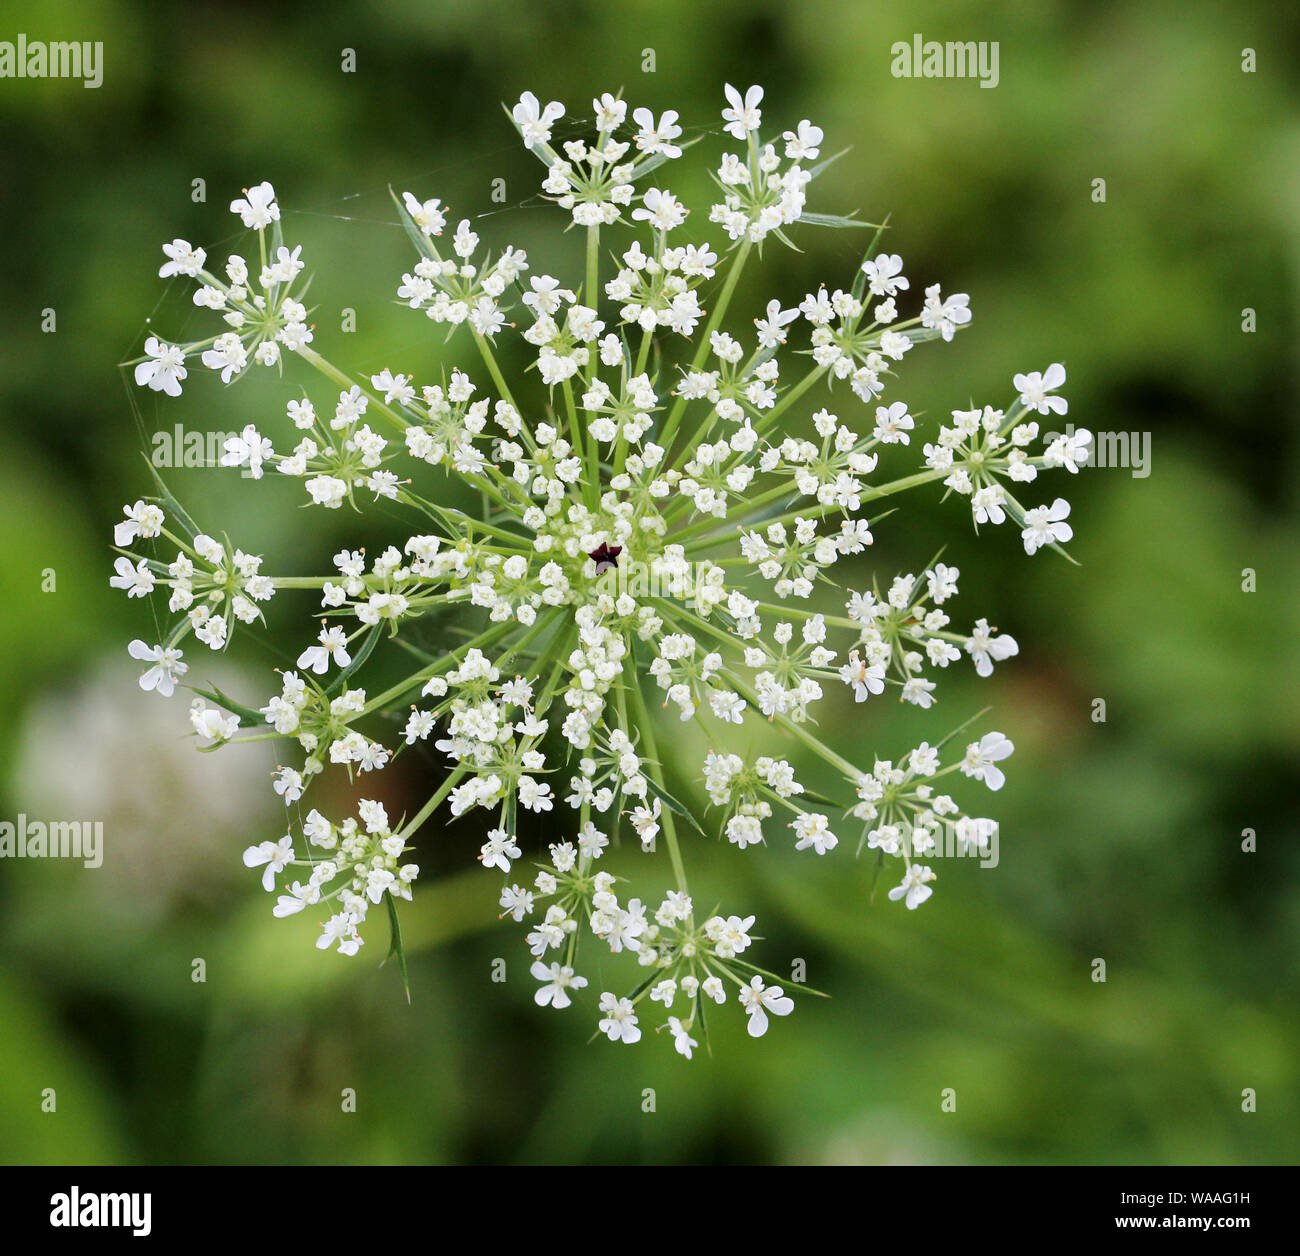 Queen Anne's Lace or Daucus Carota Blossom Macro showing center flower of the wild carrot Stock Photo